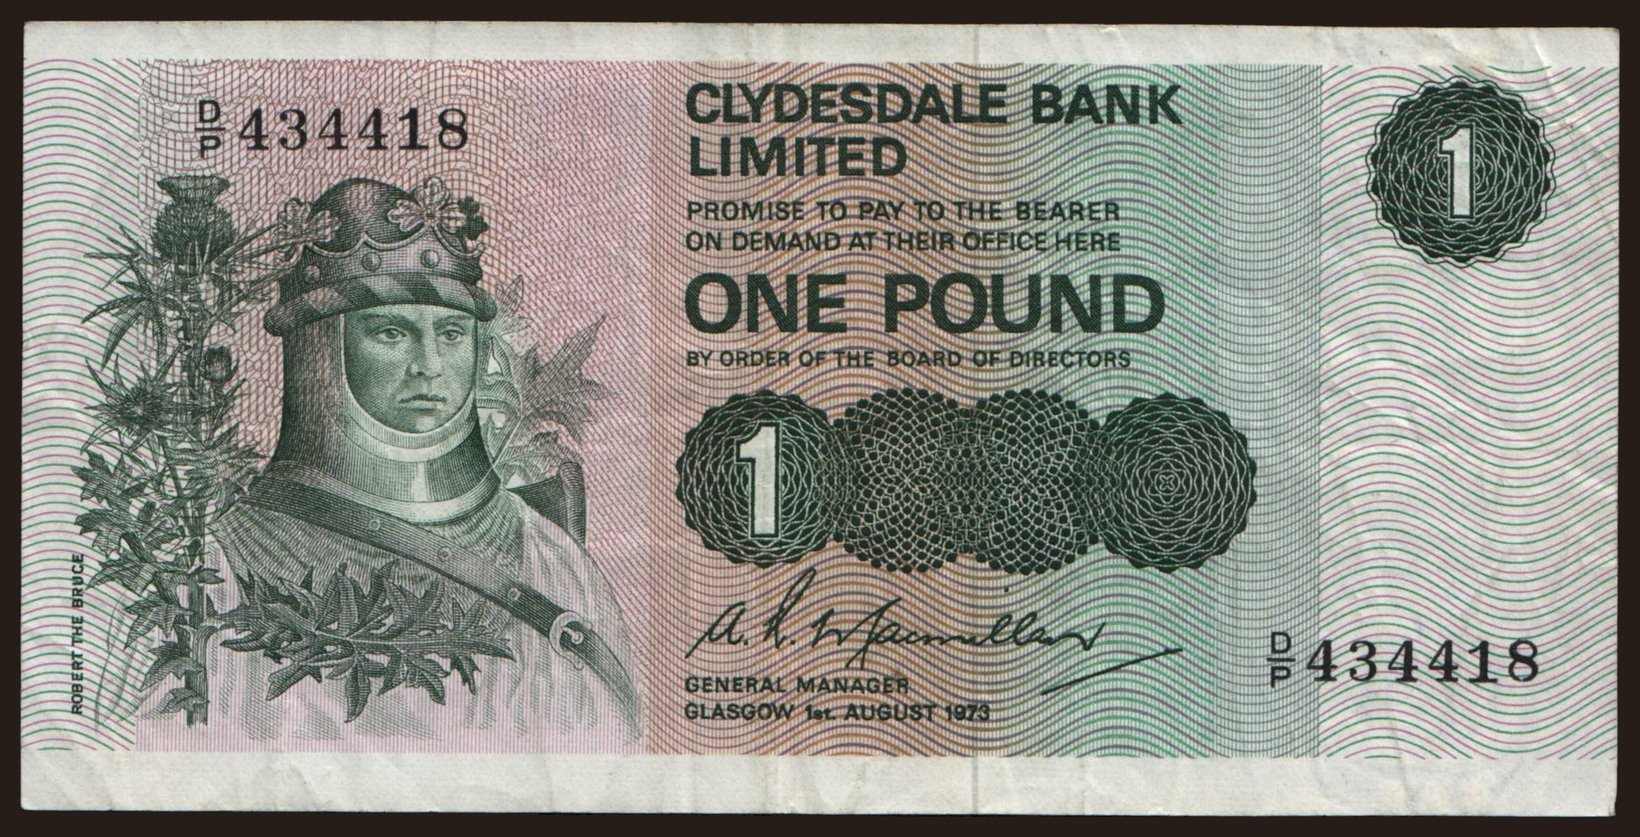 Clydesdale Bank, 1 pound, 1973